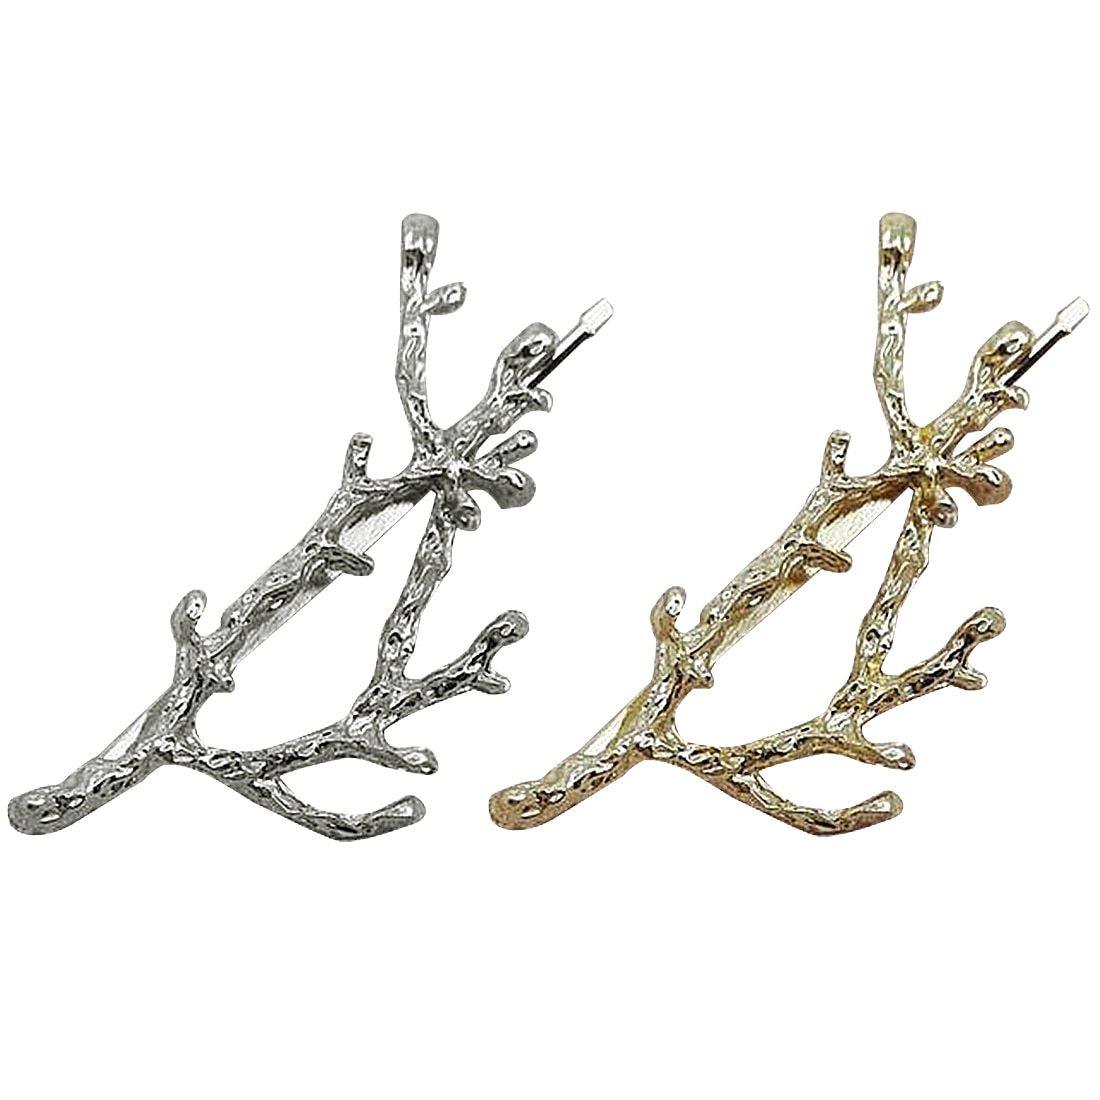 Vintage Style Tree Branch Hairpin - Floral Fawna